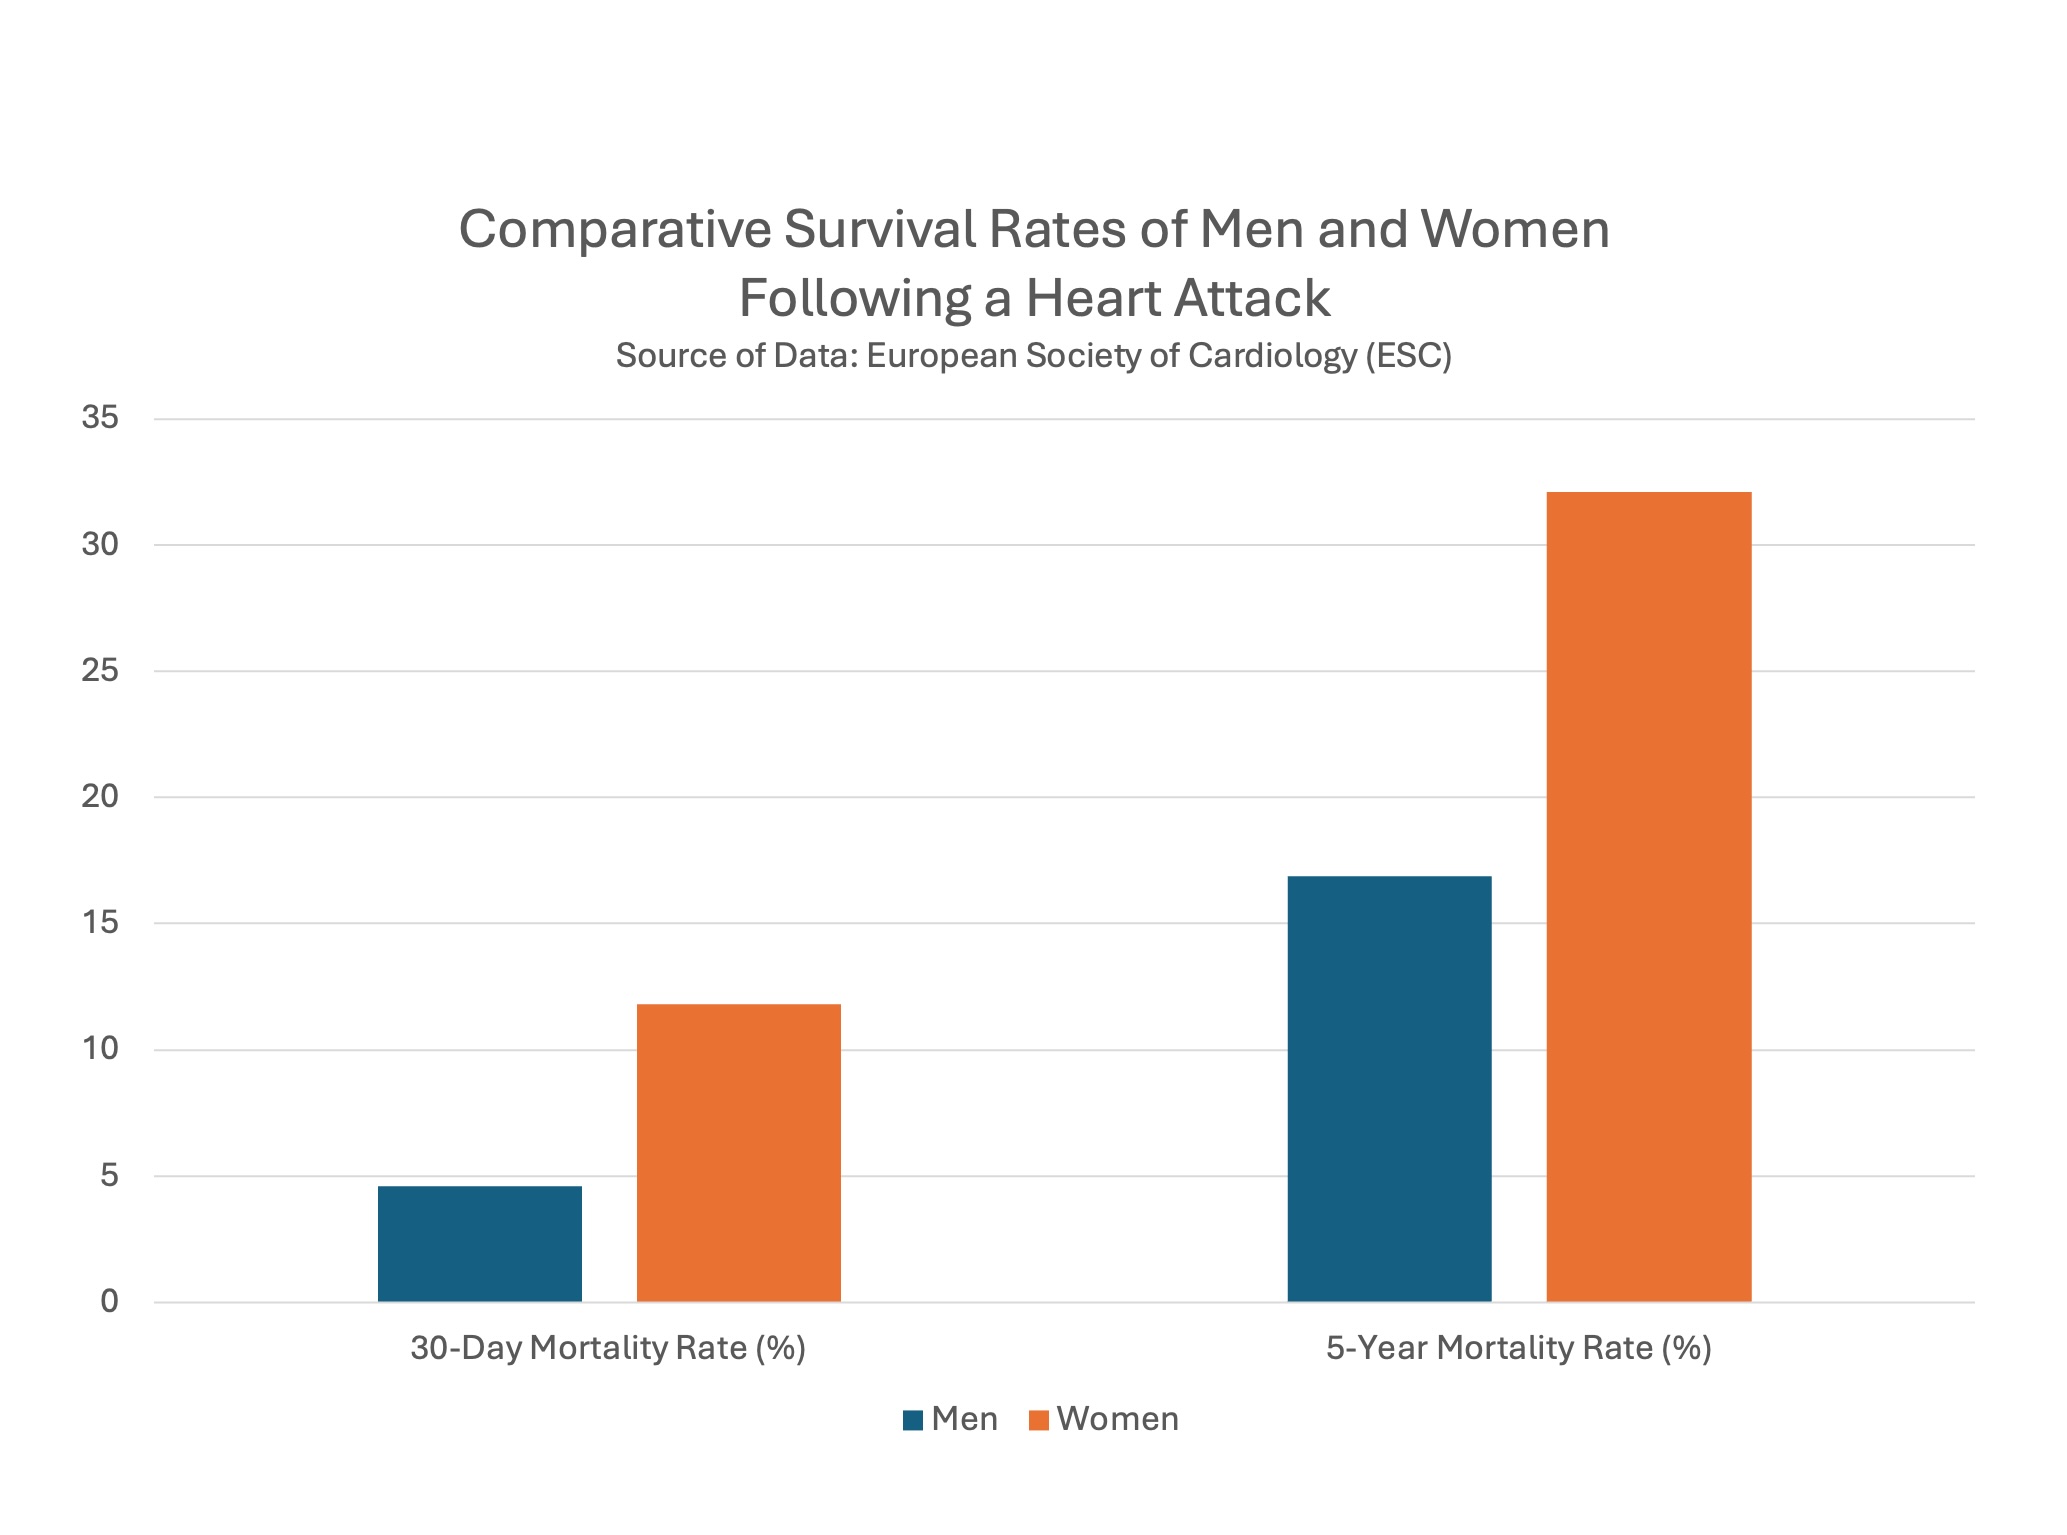 A bar chart comparing the chances of survival after a heart attack in women and men: The mortality rate after 30 days is shown in percent and next to it the mortality rate after 5 years in percent. The men are represented by a blue bar, the women by an orange bar. After 30 days, 11.8 % of women had died compared to 4.6 % of men. After five years, 32.1 % of women had died compared to 16.9 % of men.